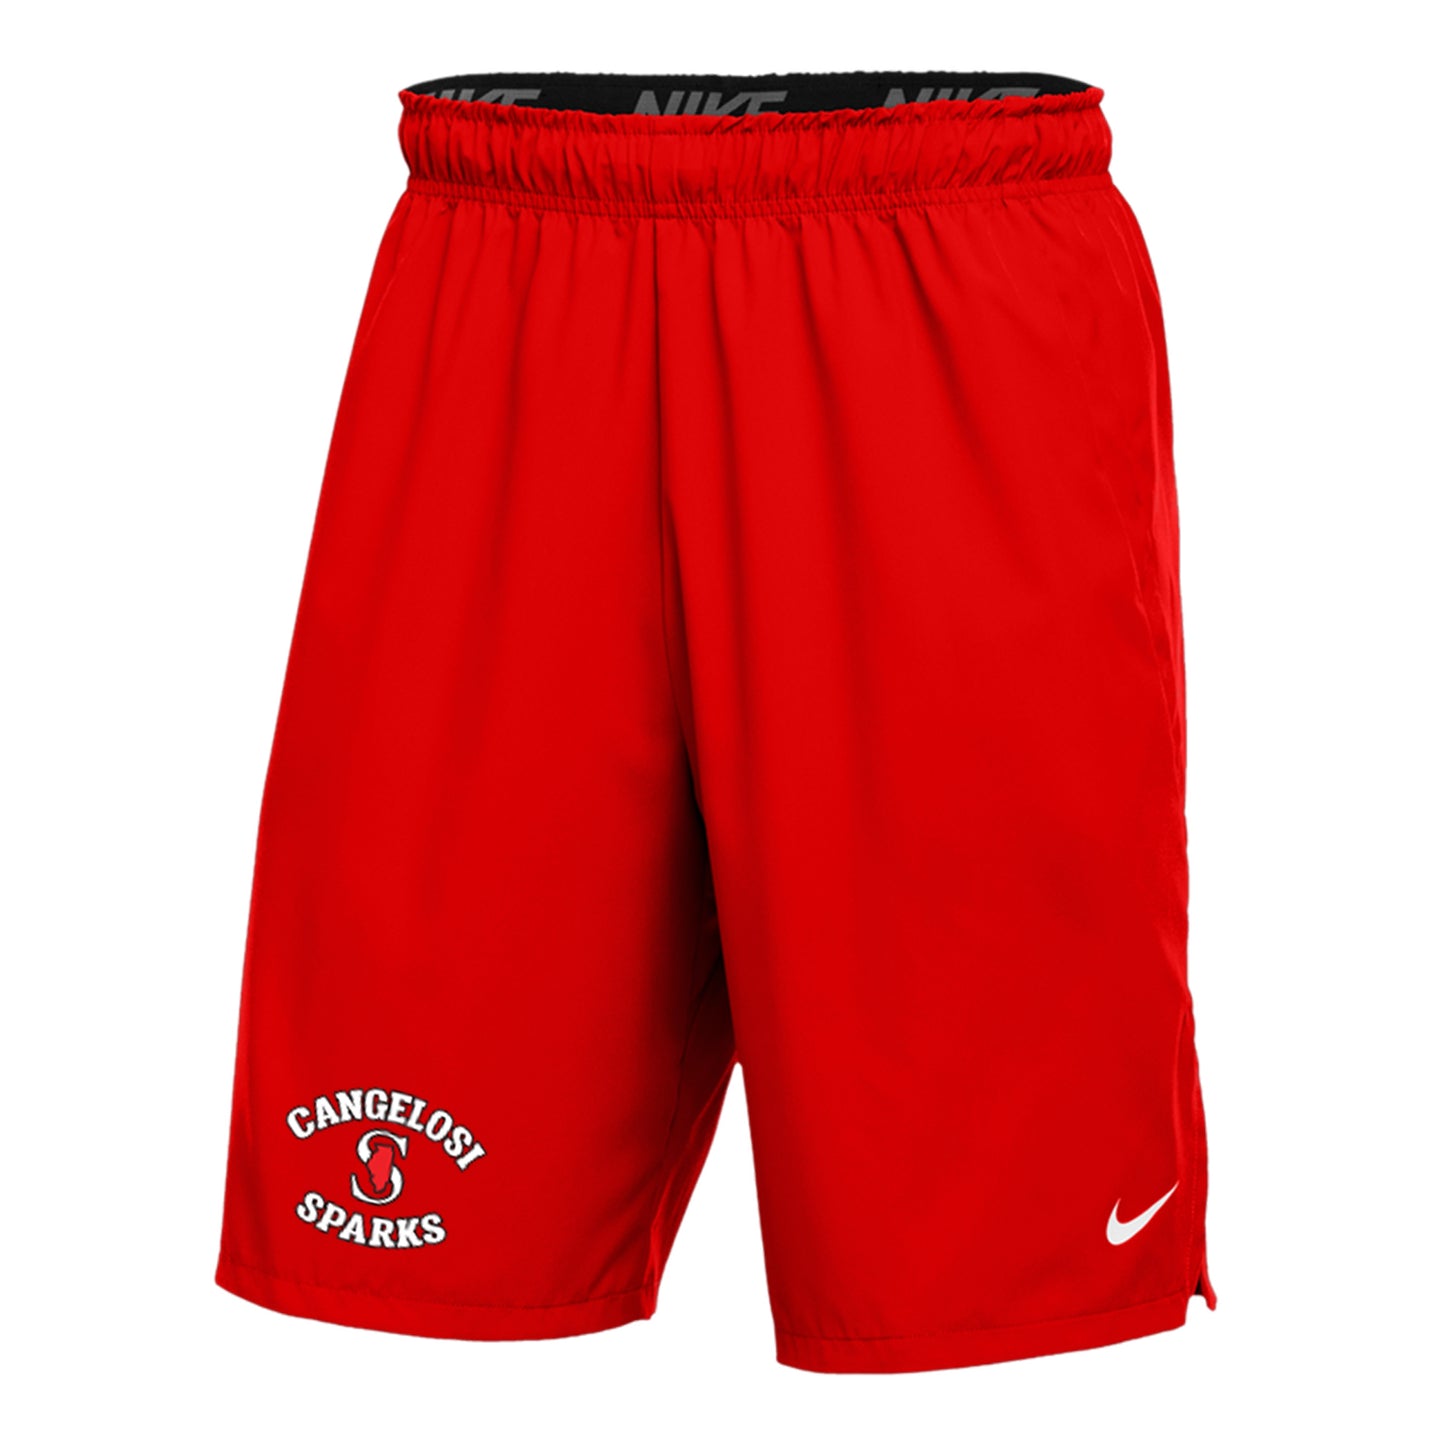 YOUTH NIKE SPARKS FLY SHORTS RED